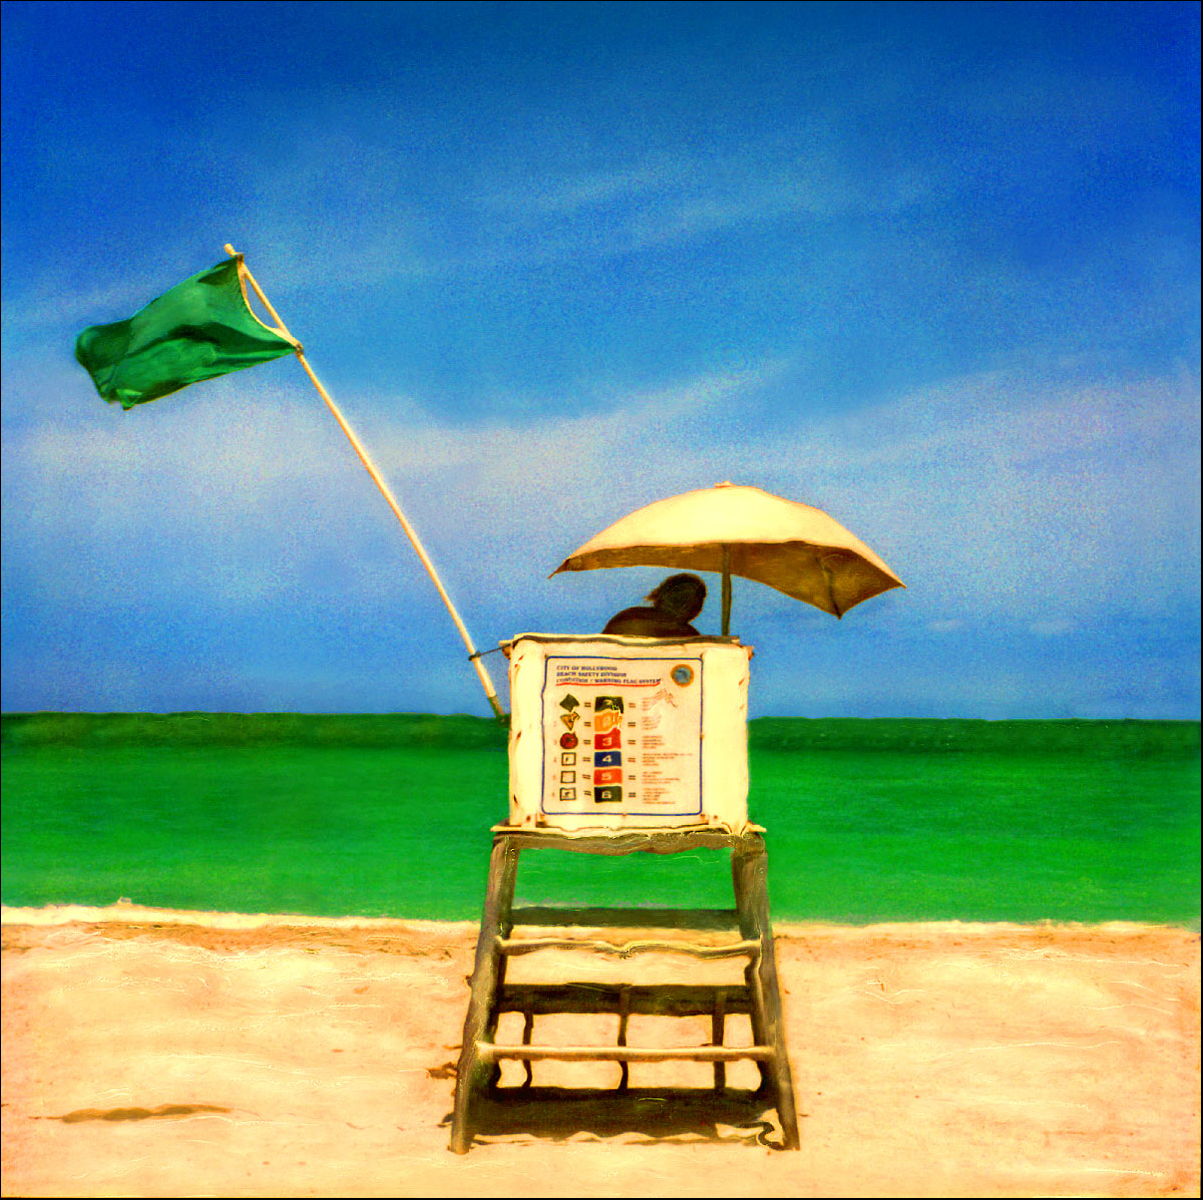 "Lifeguard Stand with Green Flag" <br>Green Water, Blue Sky, Hollywood Beach, FL